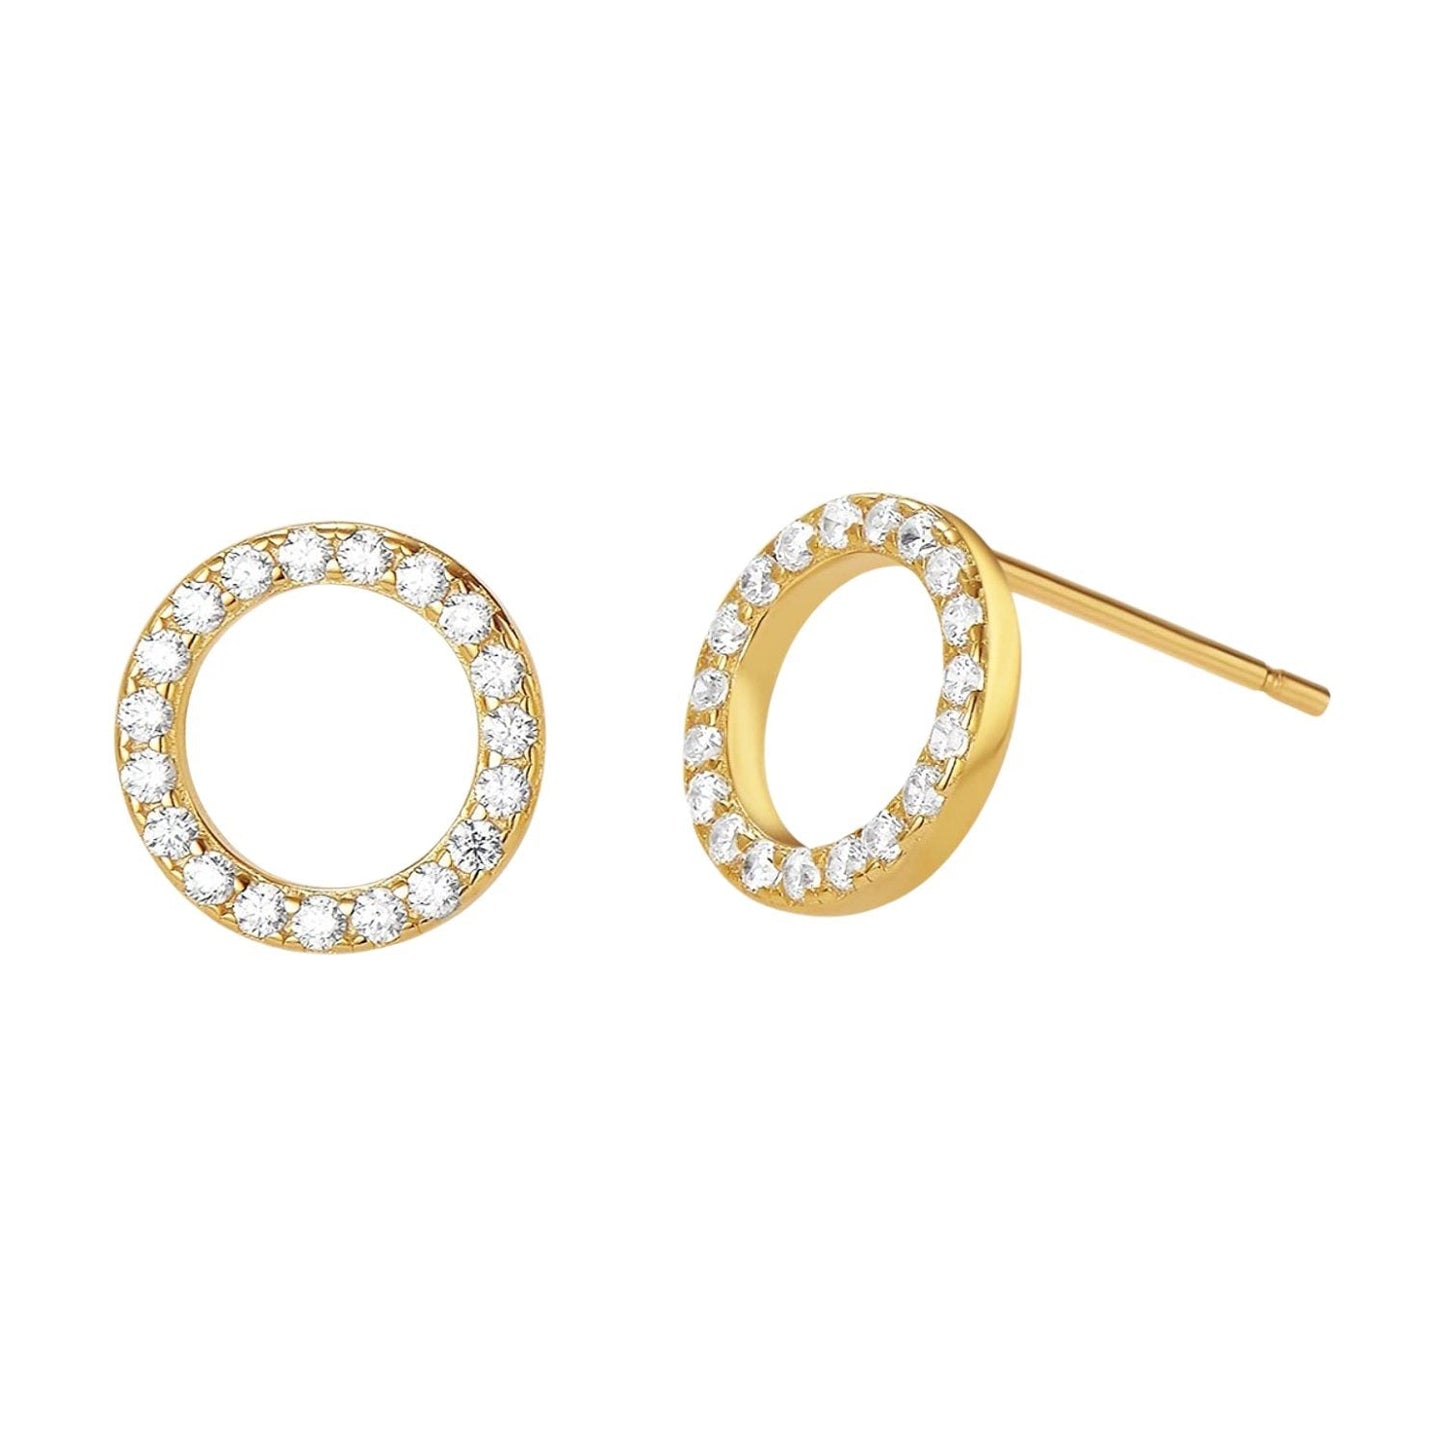 Circle of Life Earrings - 92.5 Silver in Gold - Unity, Wholeness and Completeness -18K Gold Finish